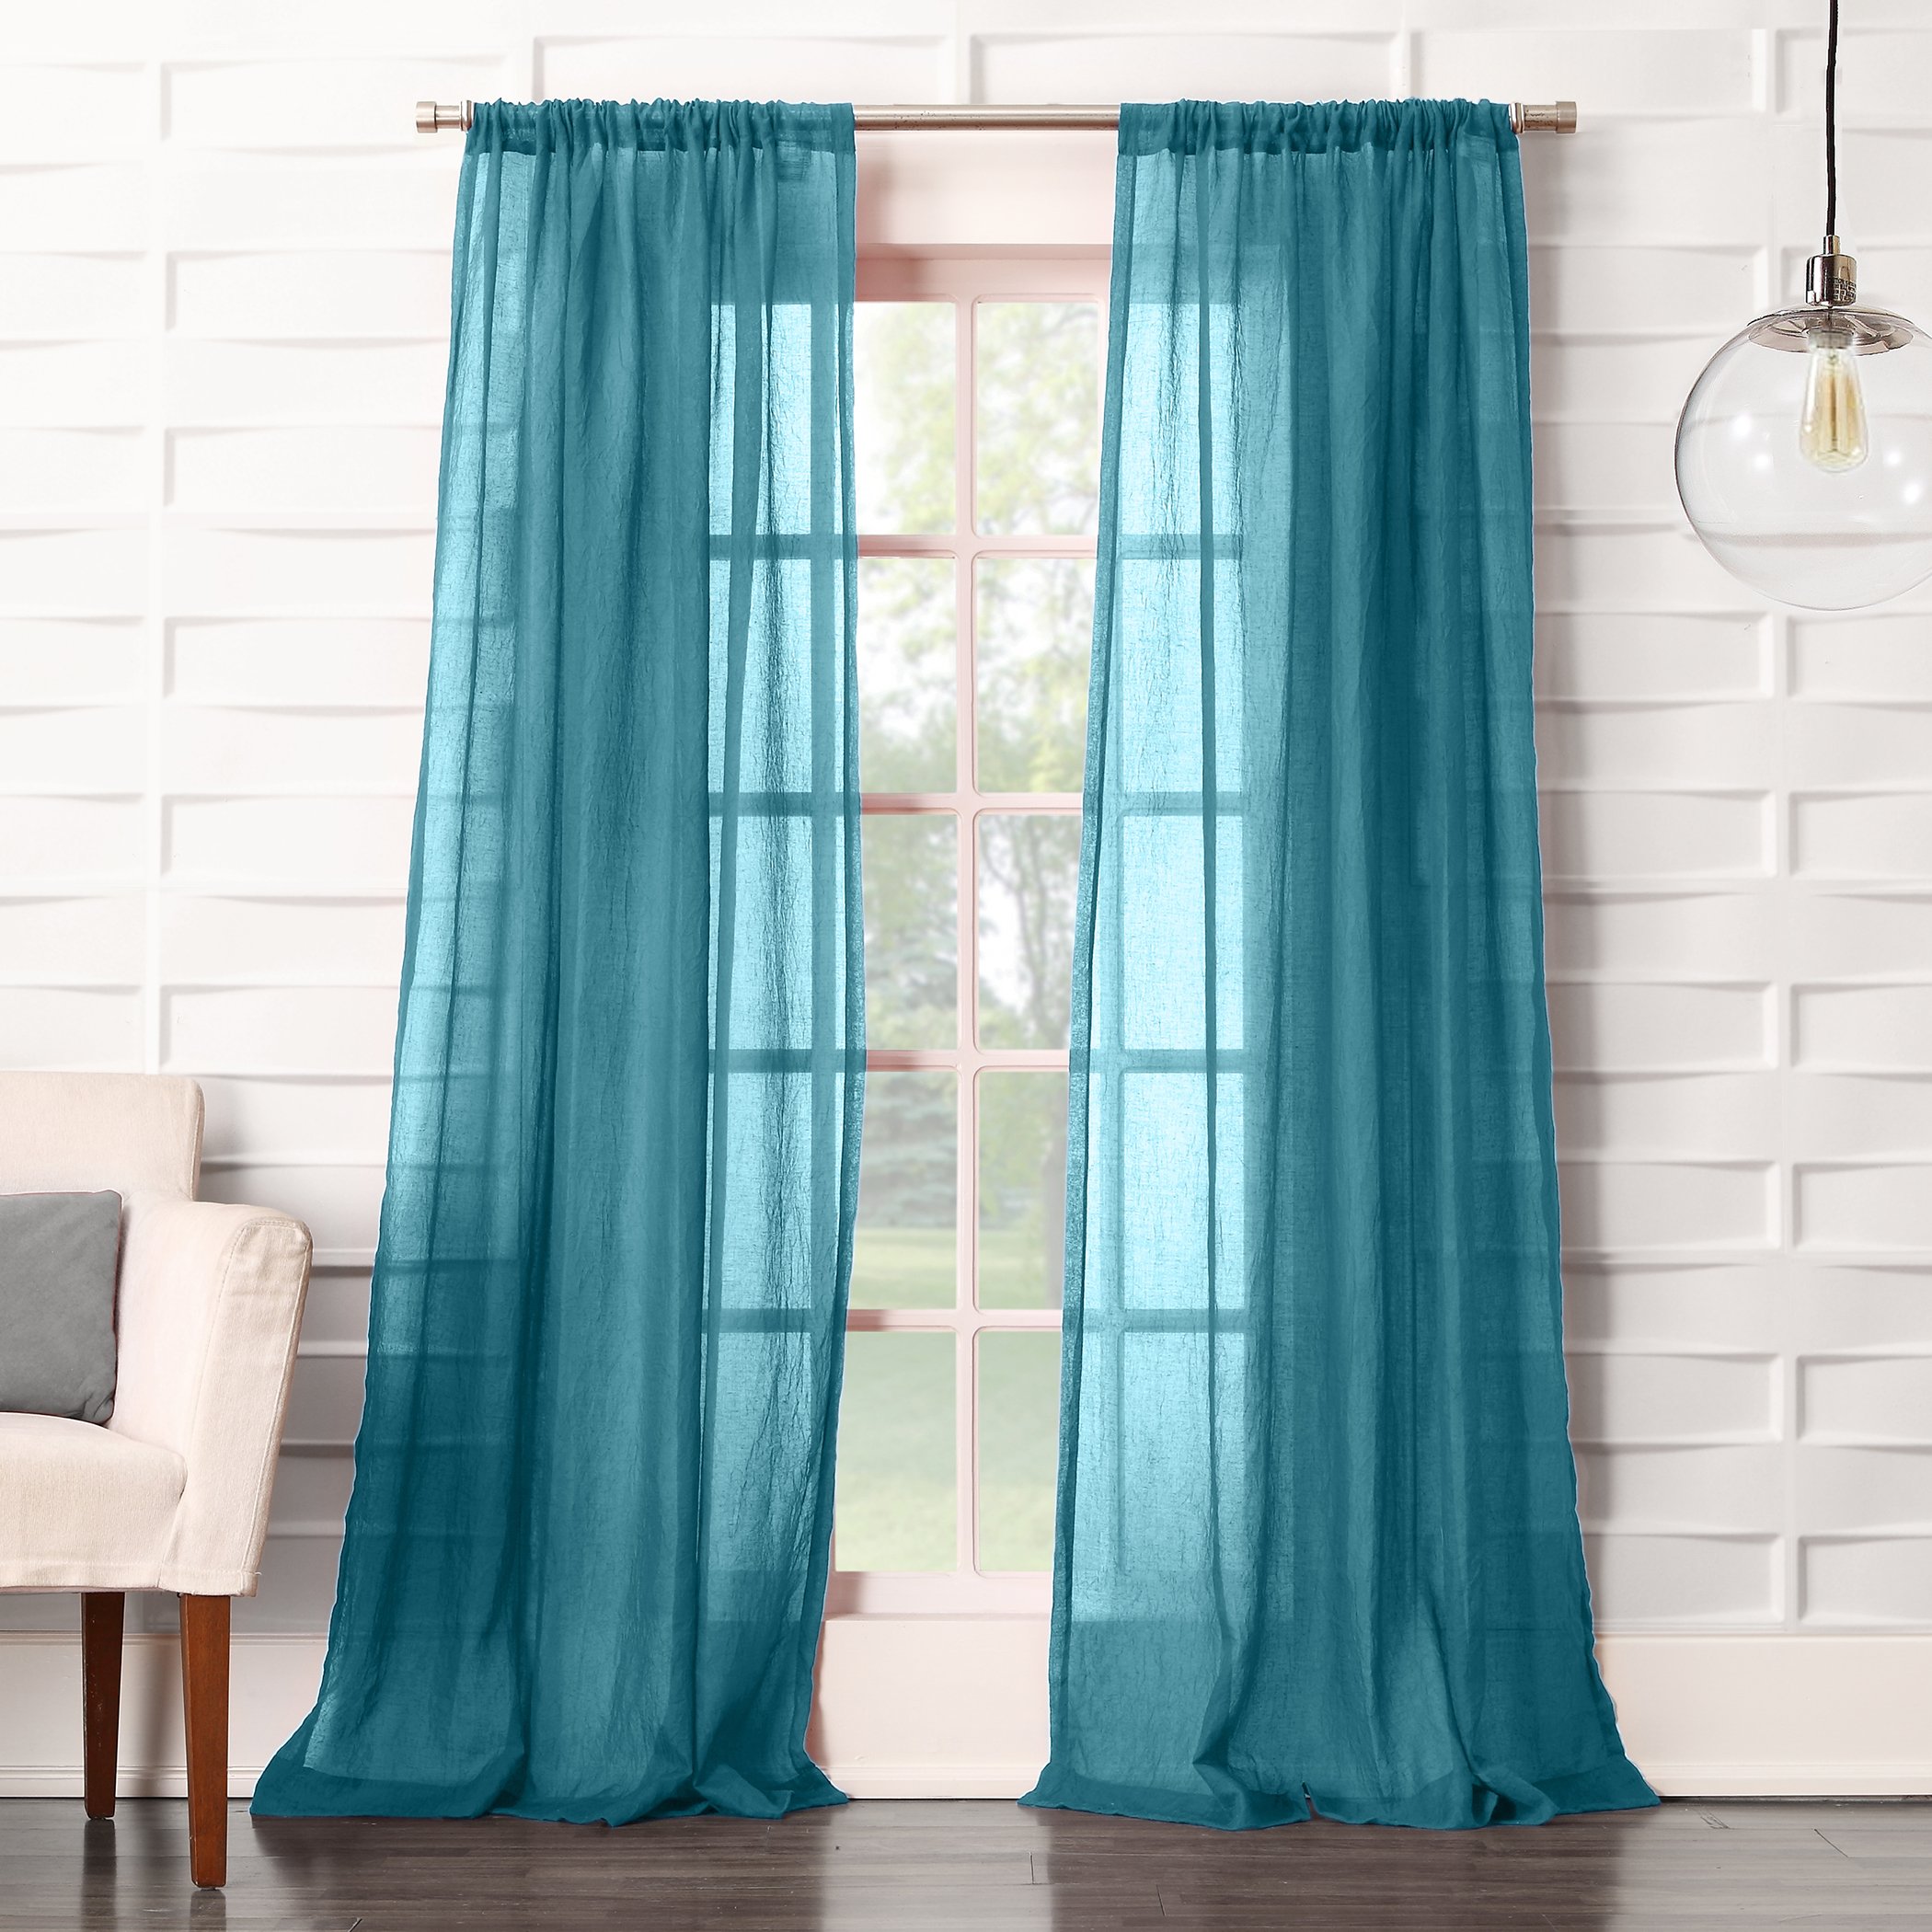 Book Cover No. 918 44072 Tayla Crushed Texture Semi-Sheer Rod Pocket Curtain Panel, 50